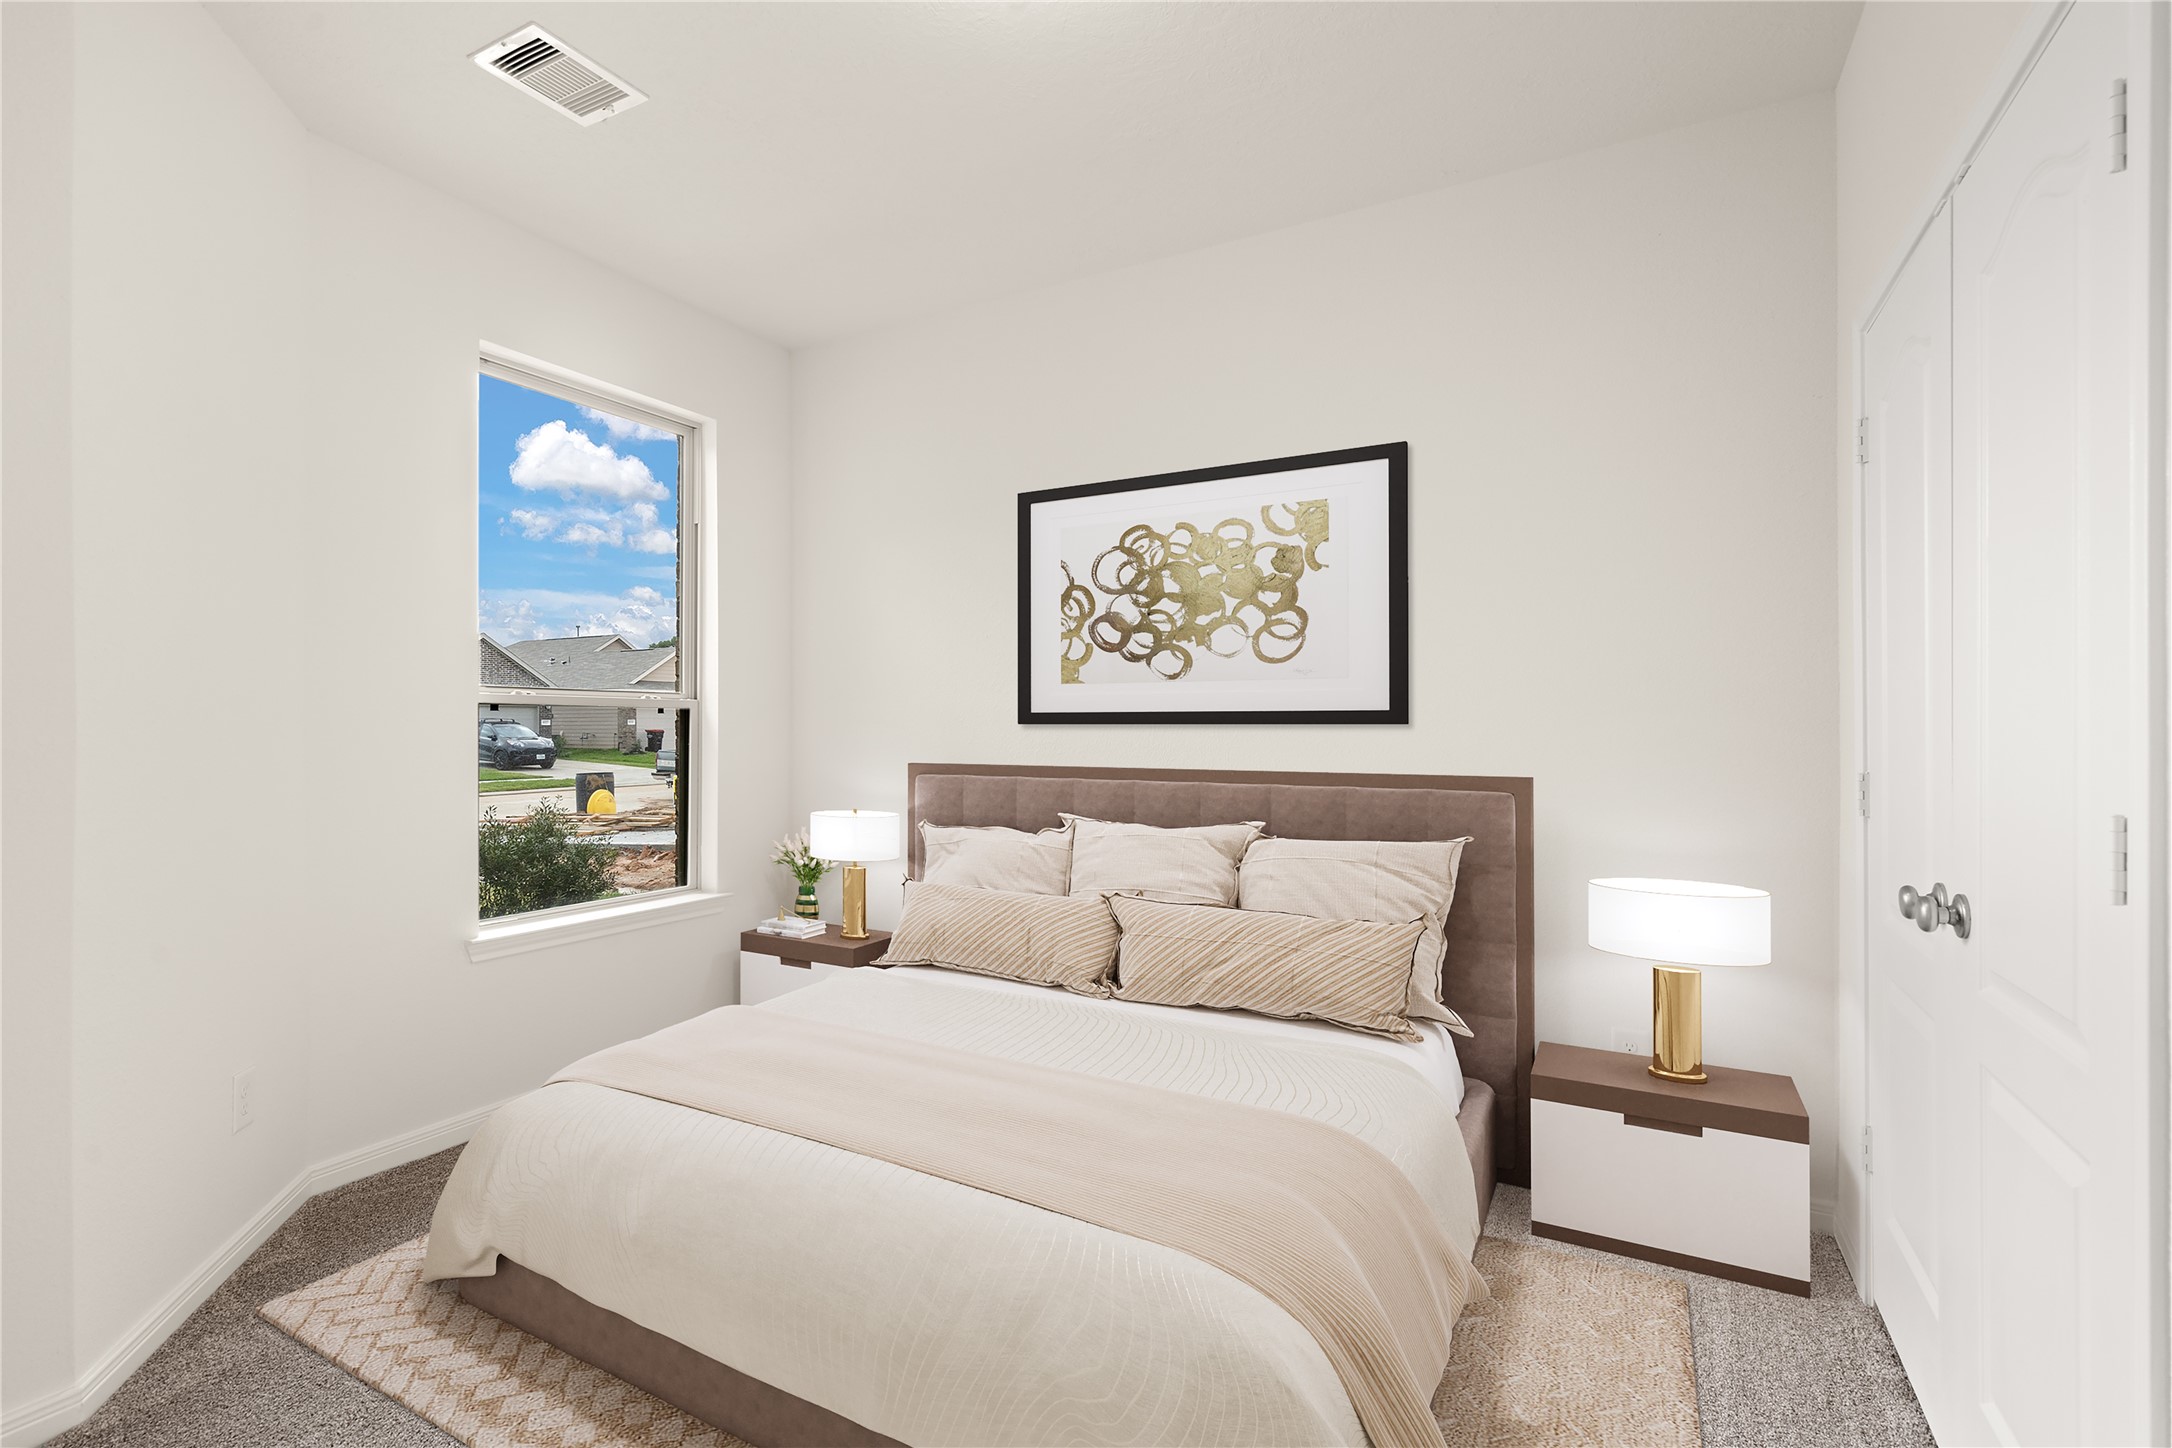 Secondary bedroom features plush carpet, custom paint and a large window.